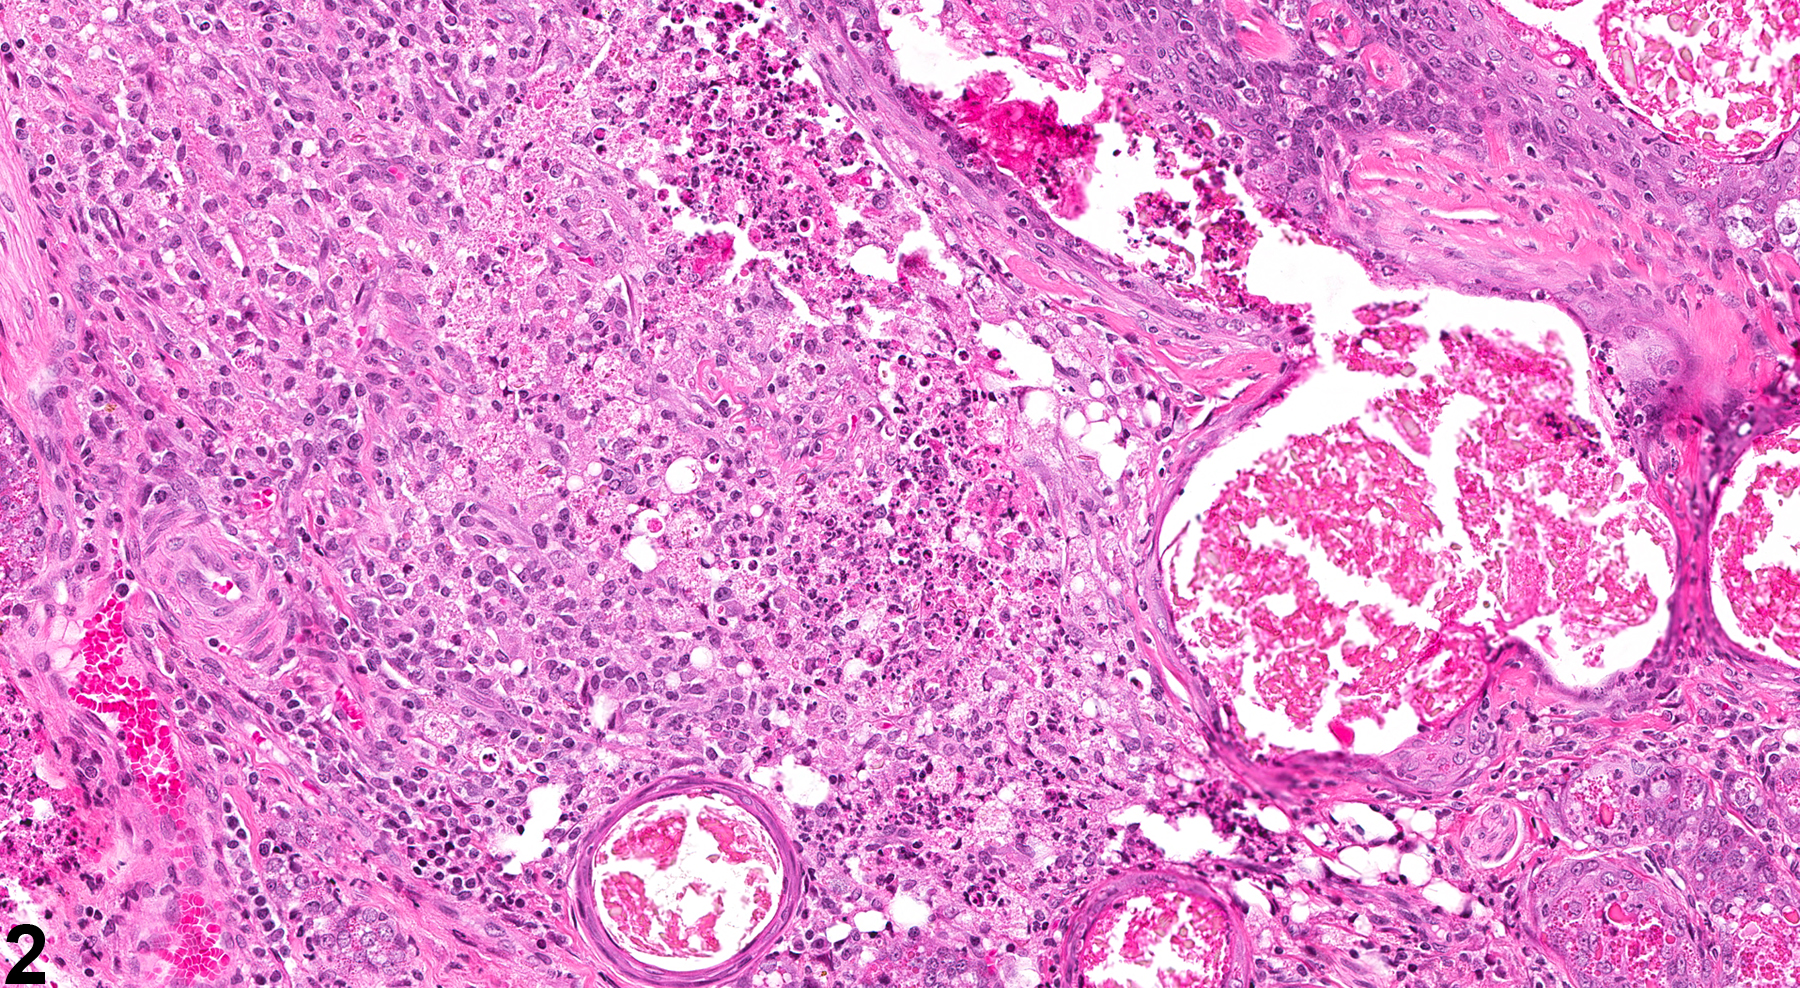 Image of inflammation, chronic active in the clitoral gland from a female F344/N rat in a chronic study